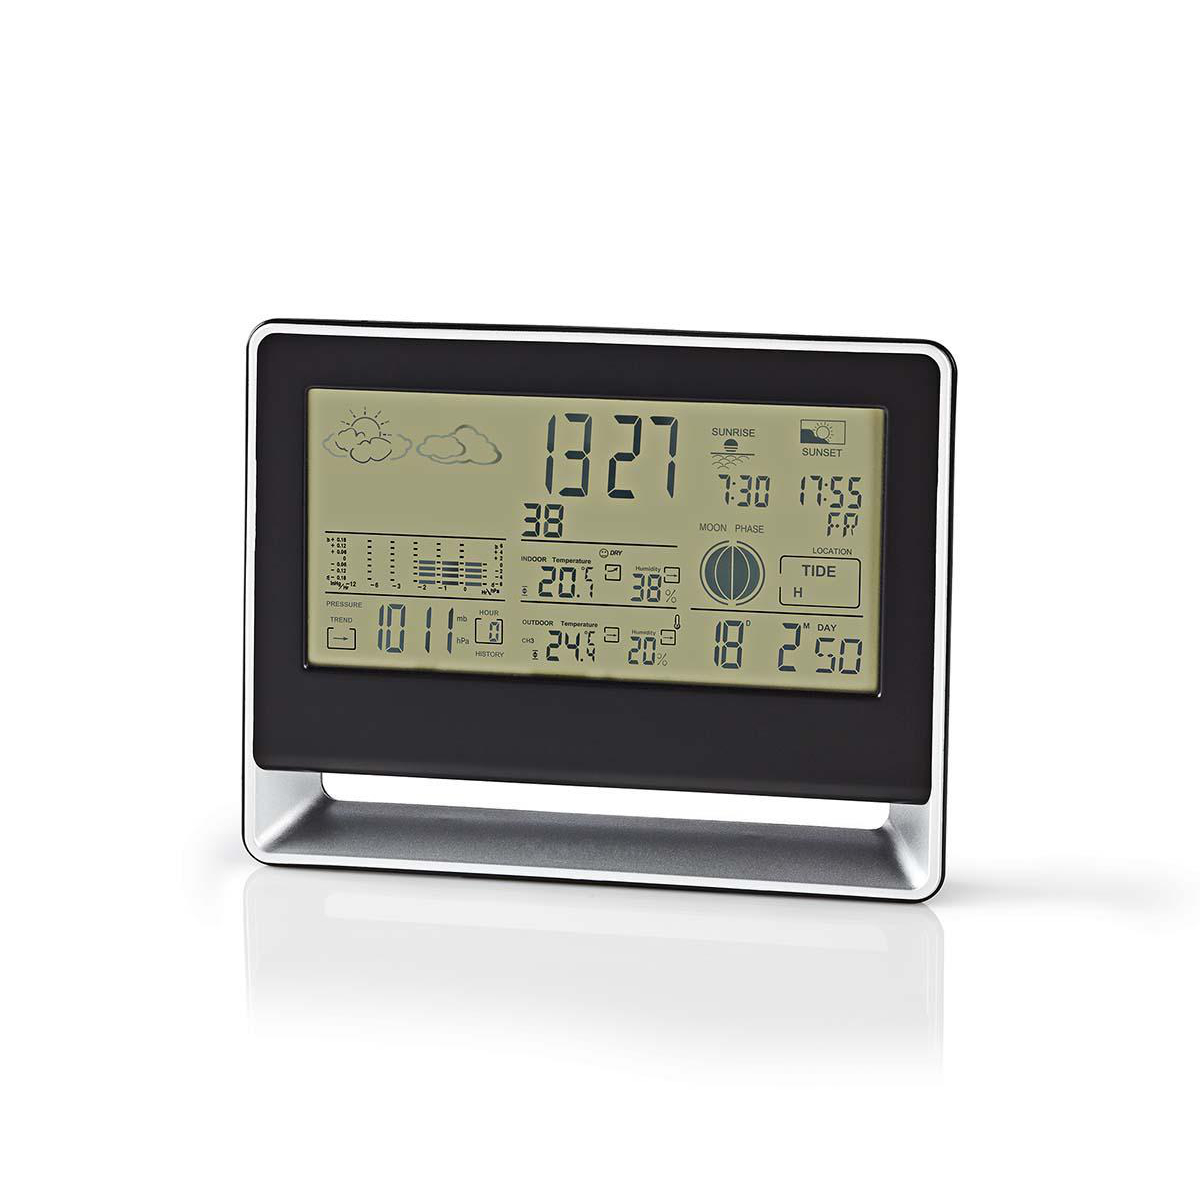 Digital Weather forecast station with Sunrise and Sunset times and moon phase